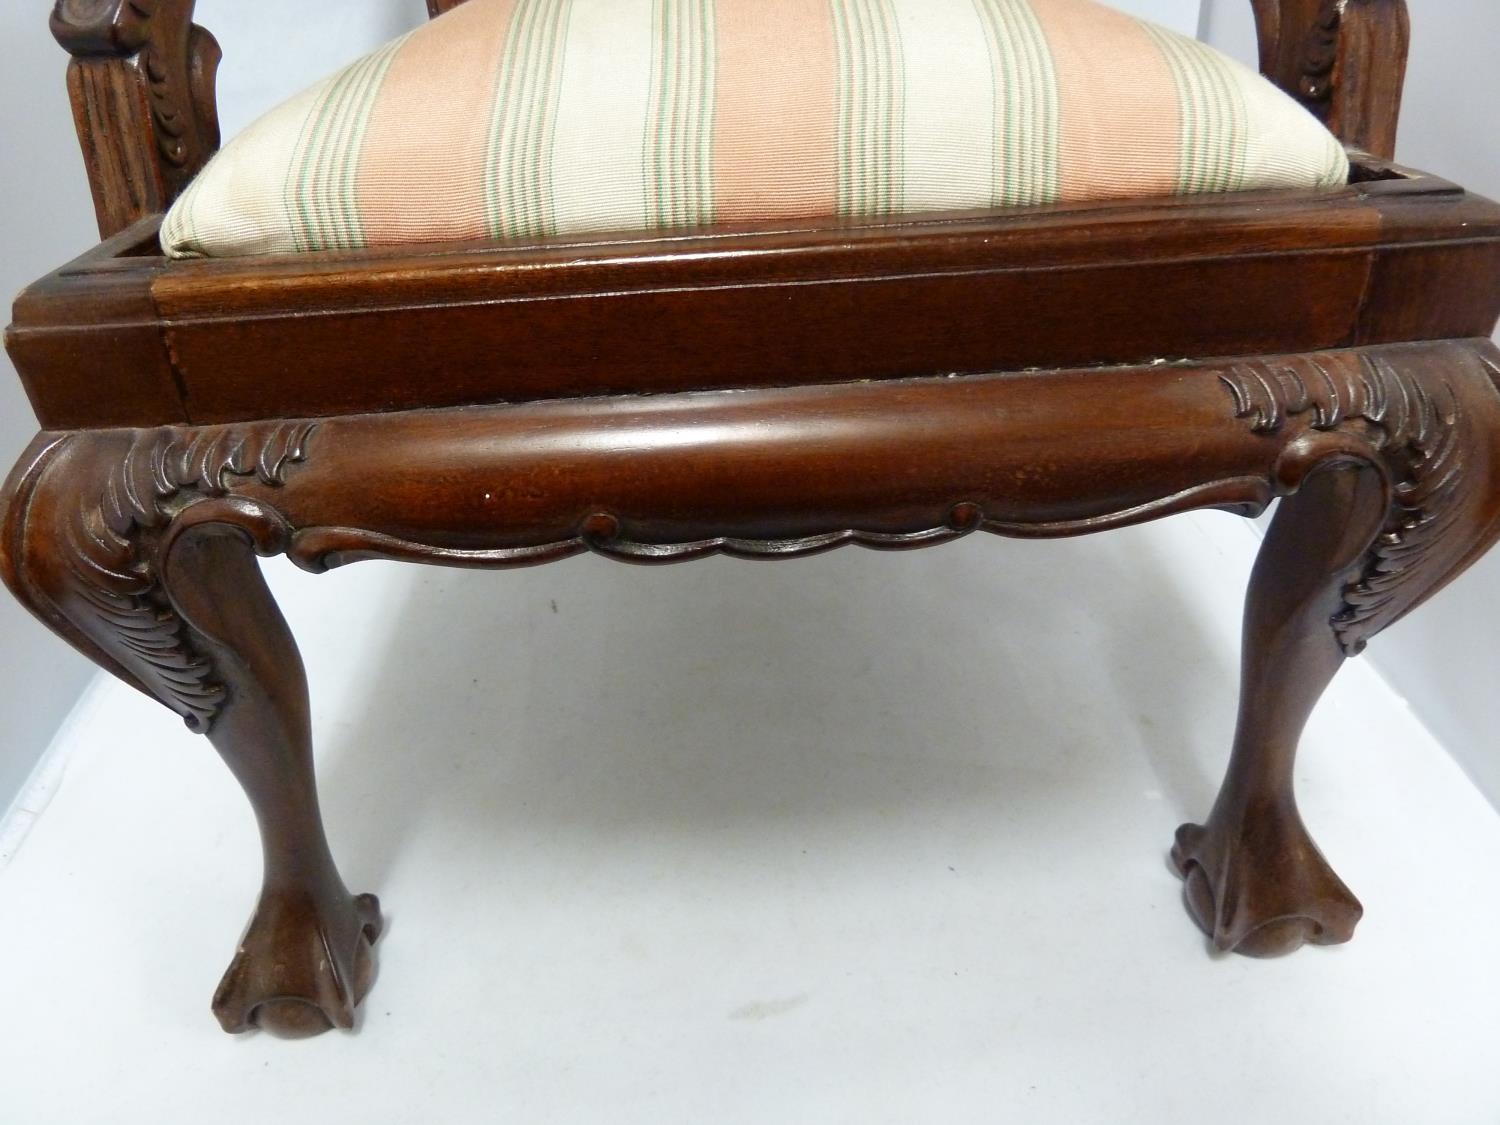 A reproduction childs/dolls chair, in Georgian style, on ball and claw feet, 50cm high - Image 3 of 4